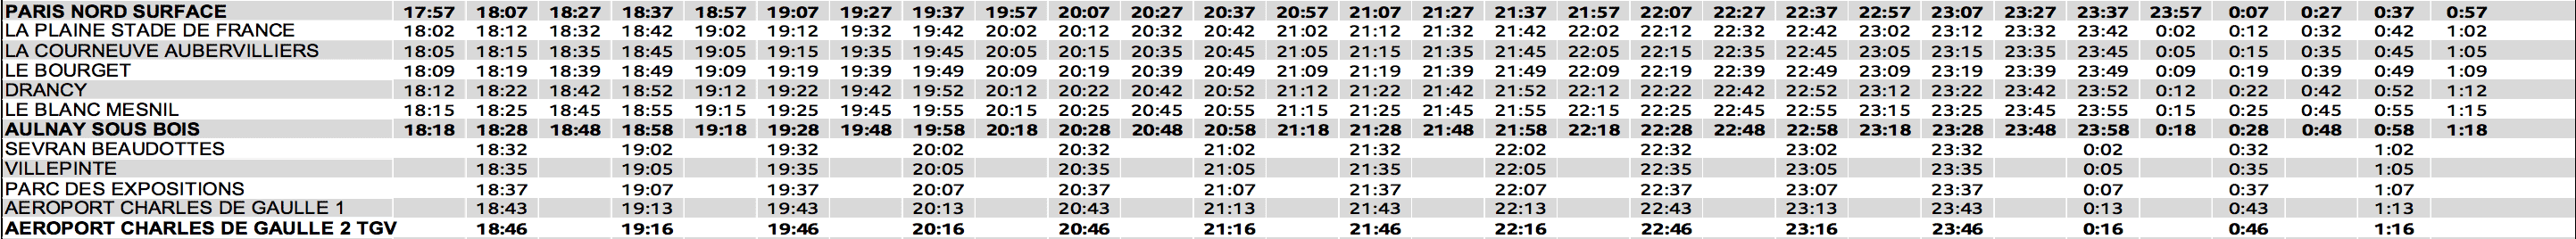 Evening RER B train Timetable Paris to CDG during weekend strike service January 2020